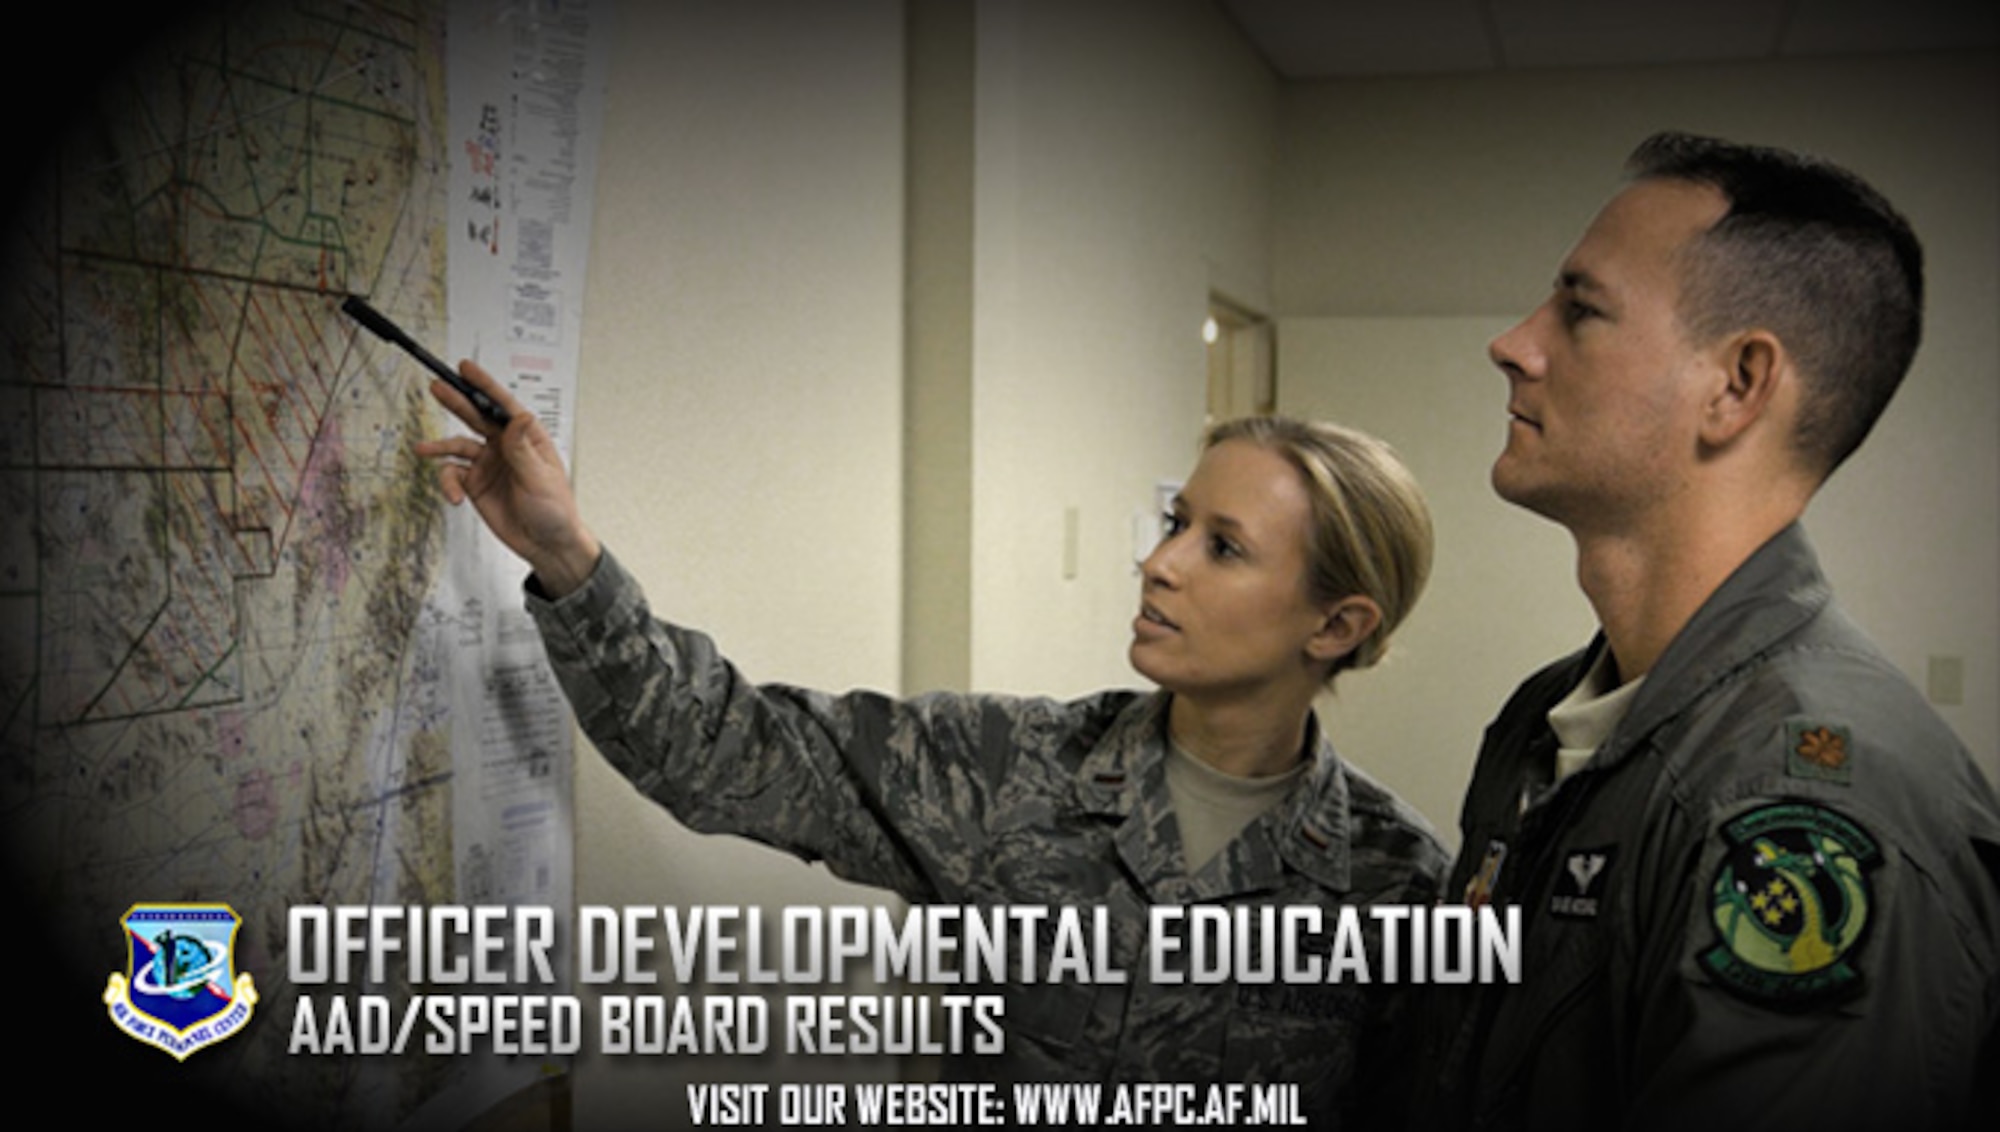 Advanced Academic Degree/Special Experience Exchange Duty programs provide targeted developmental education and broadening developmental assignments for officers in eligible career fields.  (U.S. Air Force graphic by Staff Sgt. Alexx Pons)